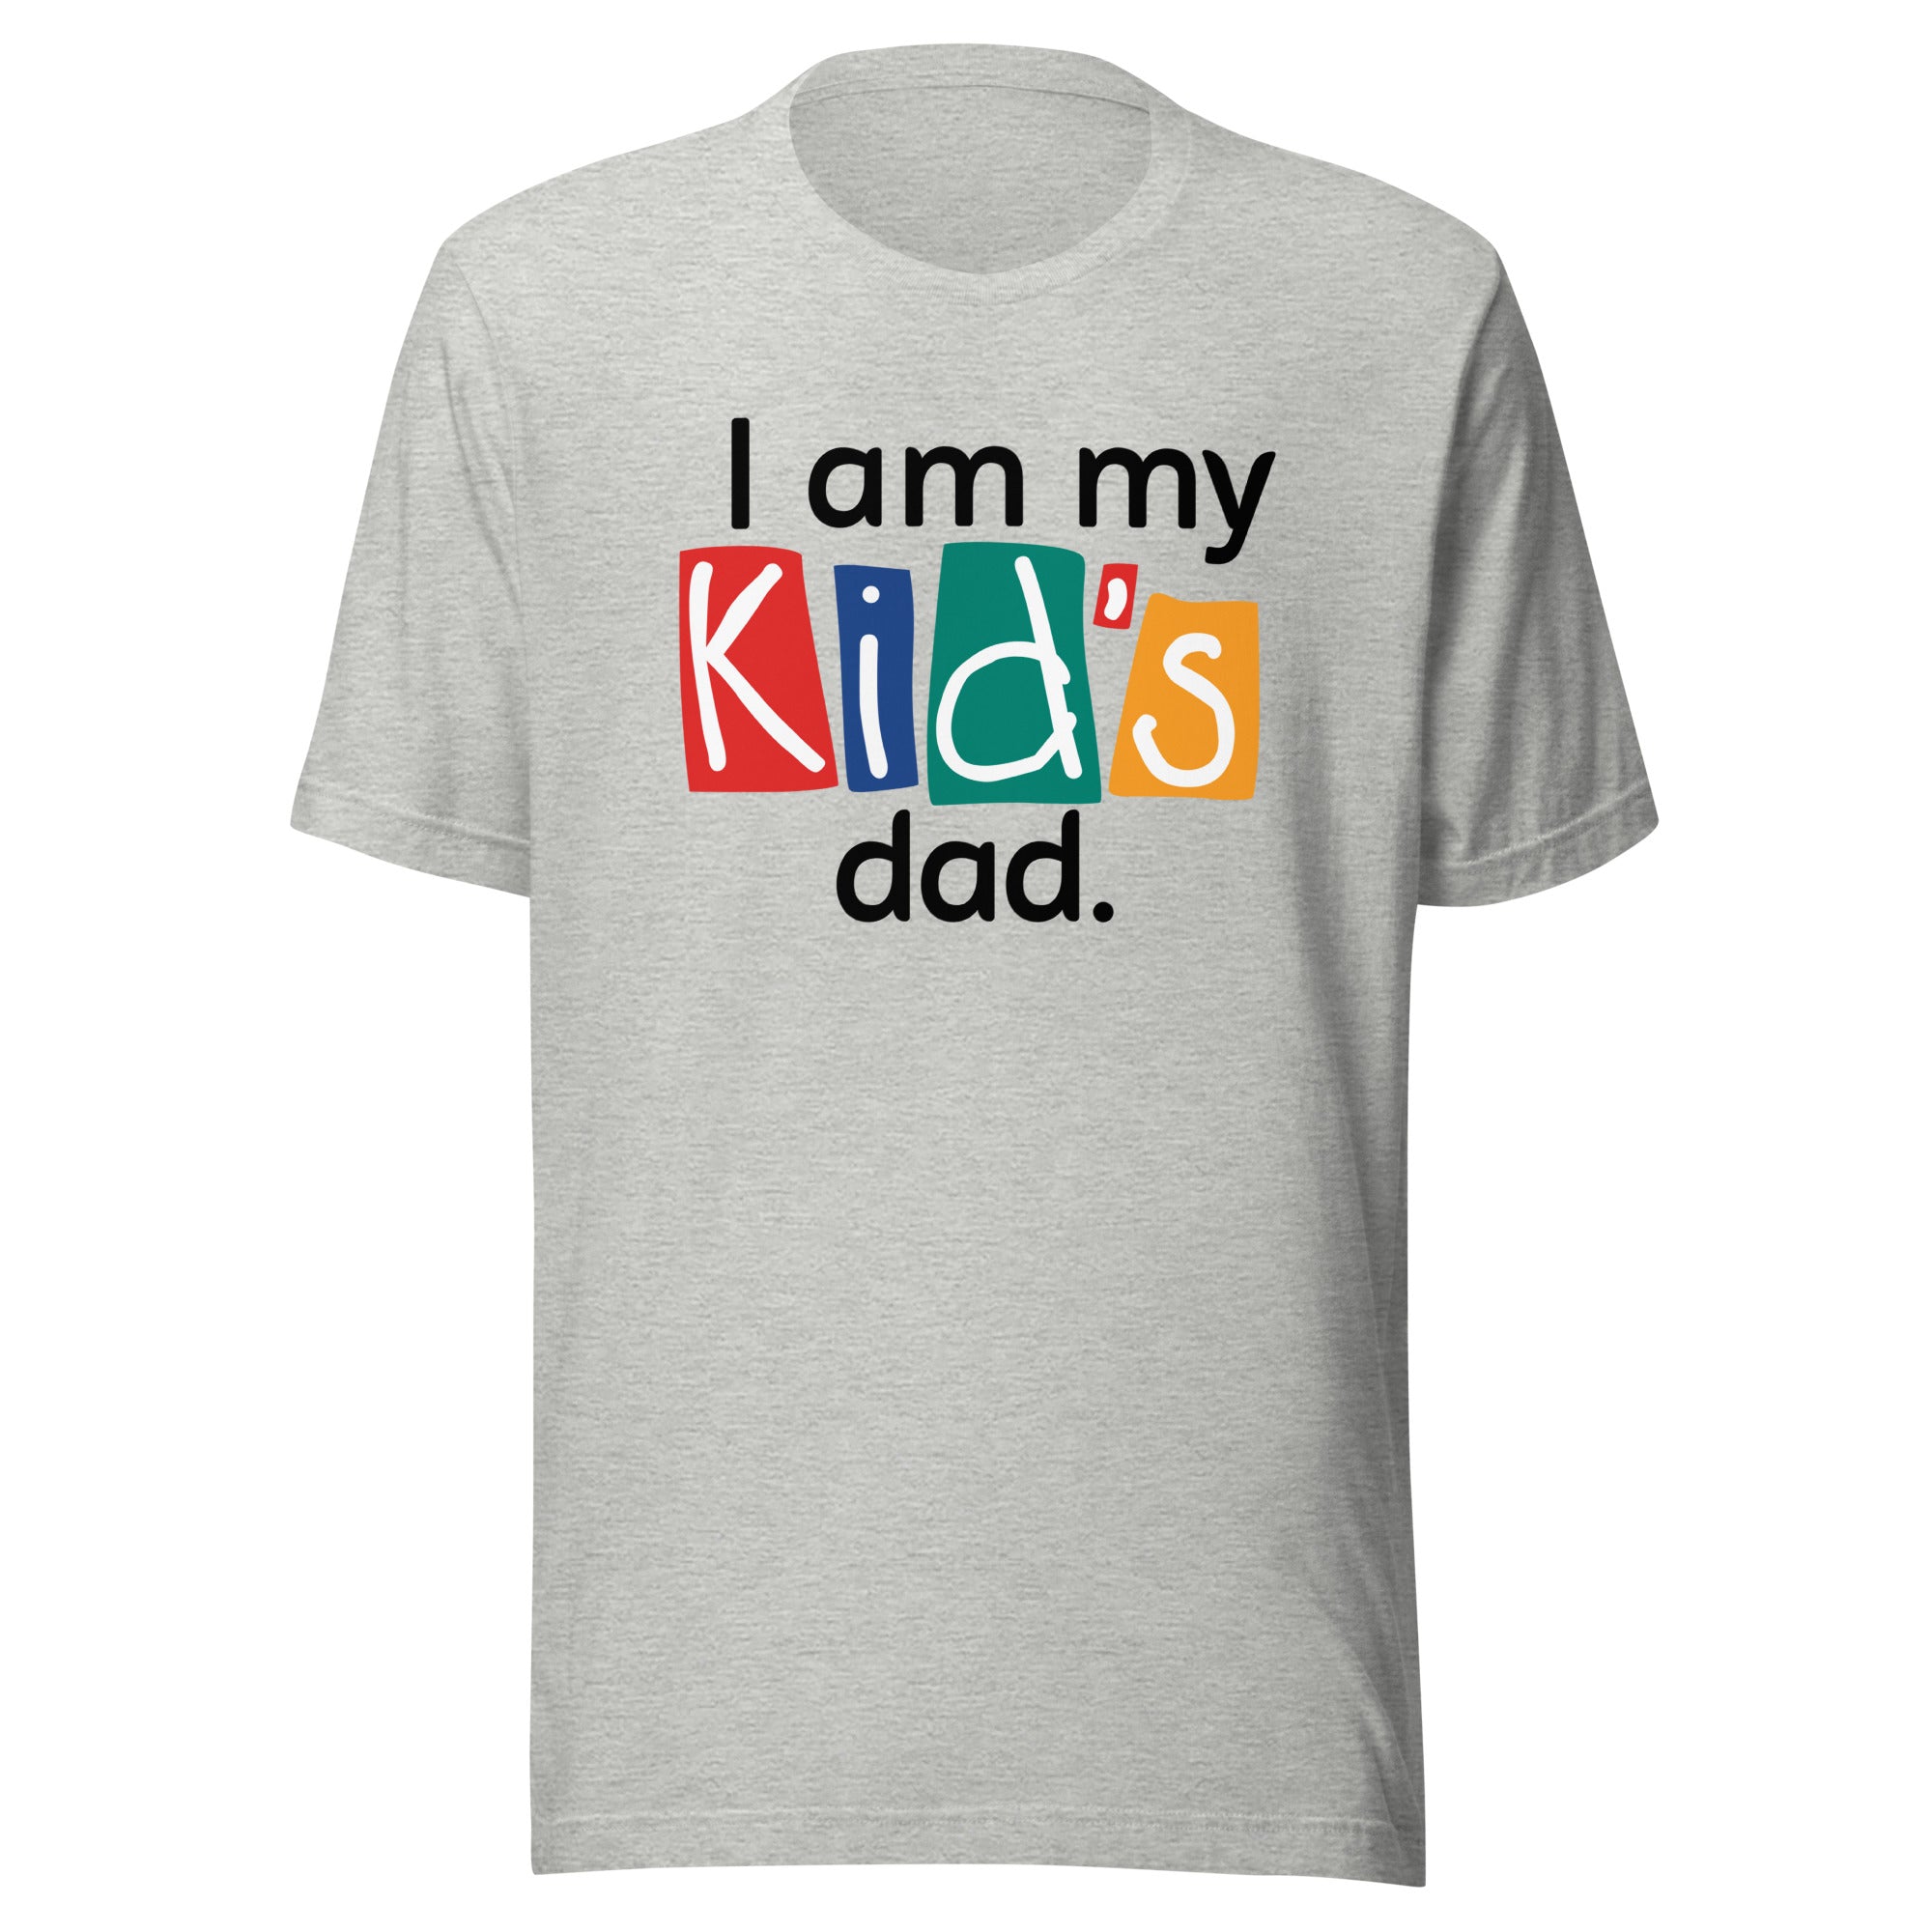 Dr. Laura: My Kid's Dad T-shirt